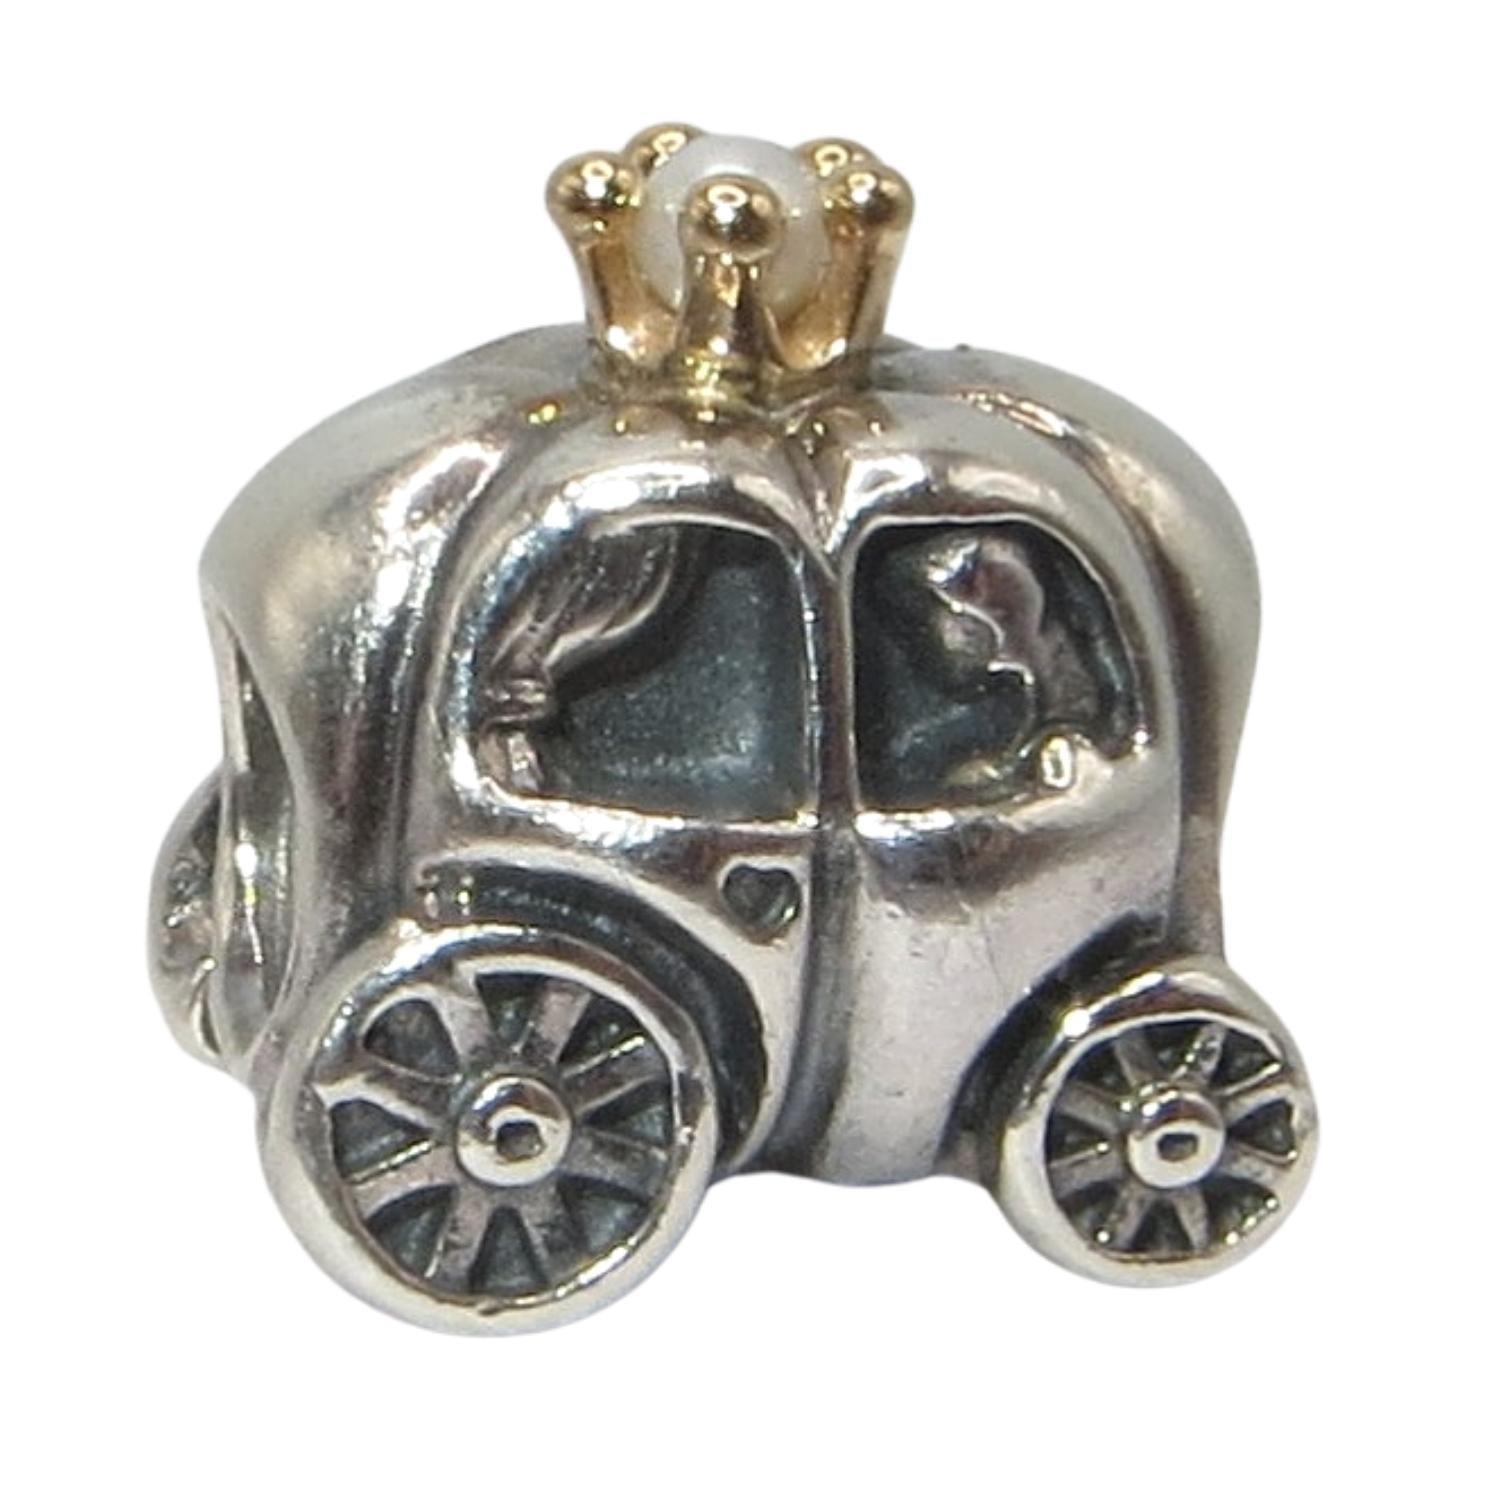 ﻿PANDORA 790598P Royal Carriage - Sterling Silver 4-Wheel Carriage with Curtain at Door Window - Royal Princess Seated at Rear of Carriage - 14k Crown adorns top and has White Pearl inside